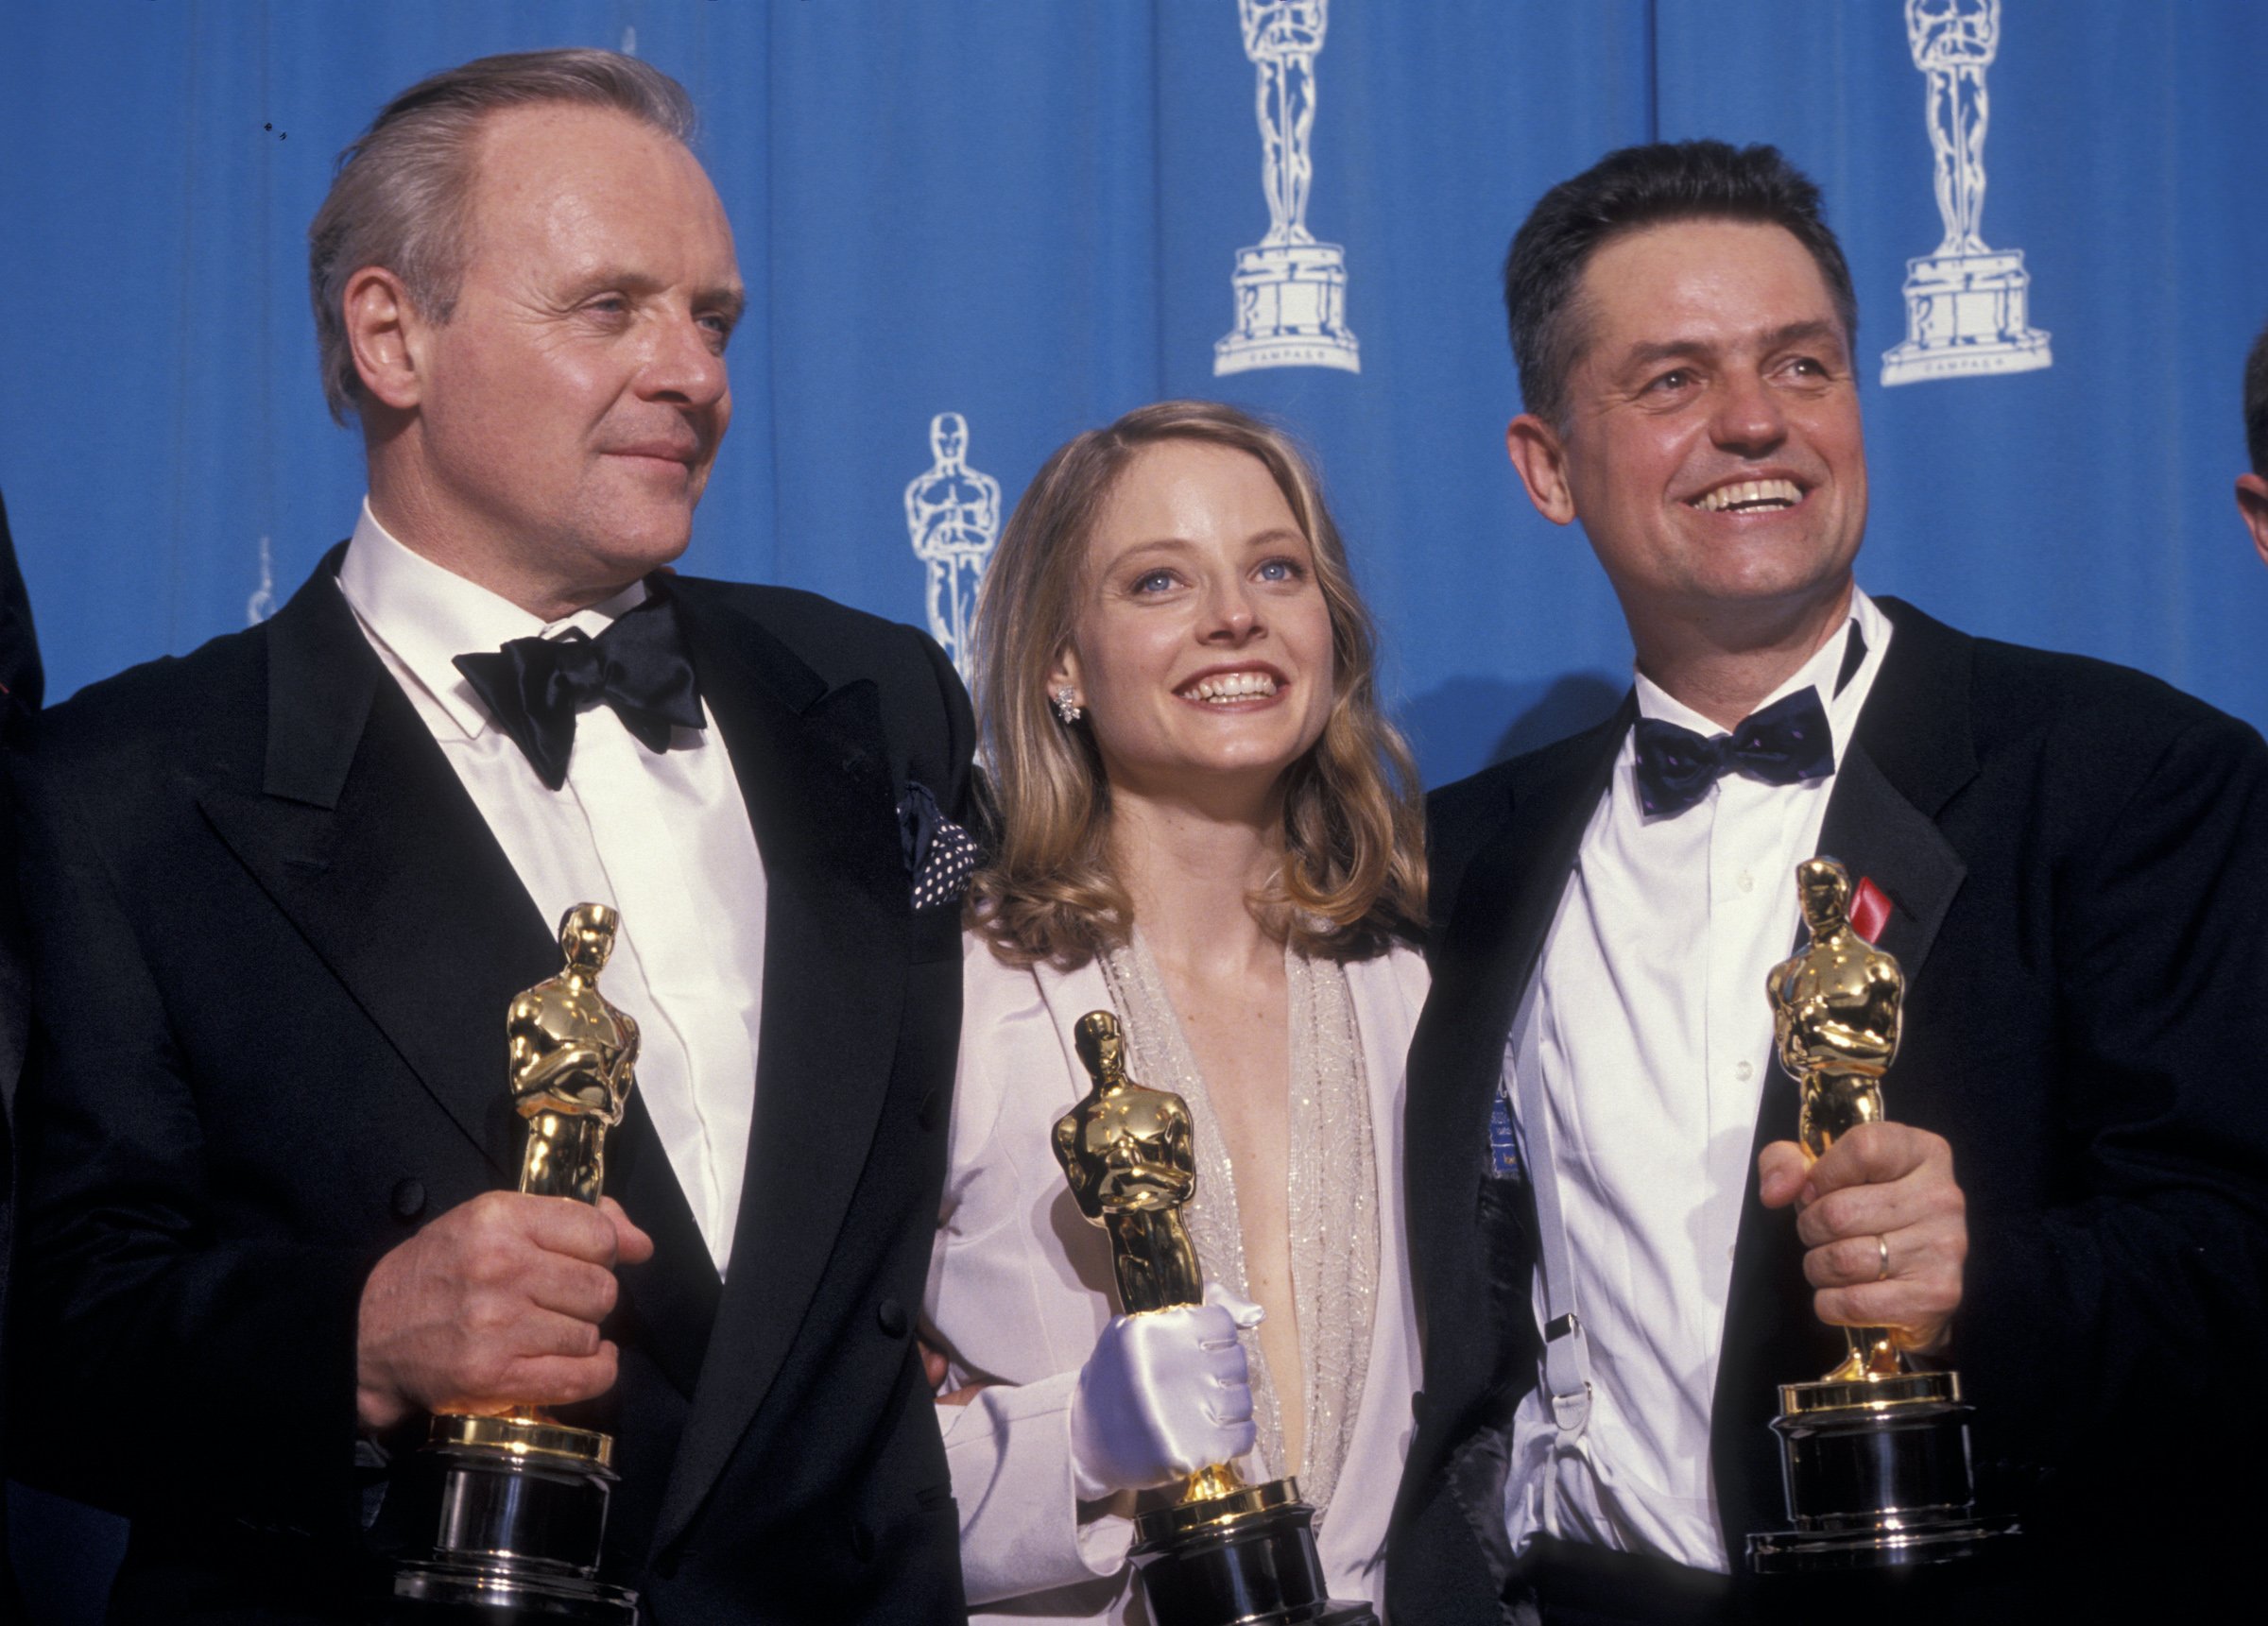 Anthony Hopkins, Jodie Foster, and Jonathan Demme pose with their Oscar statues at the Academy Awards